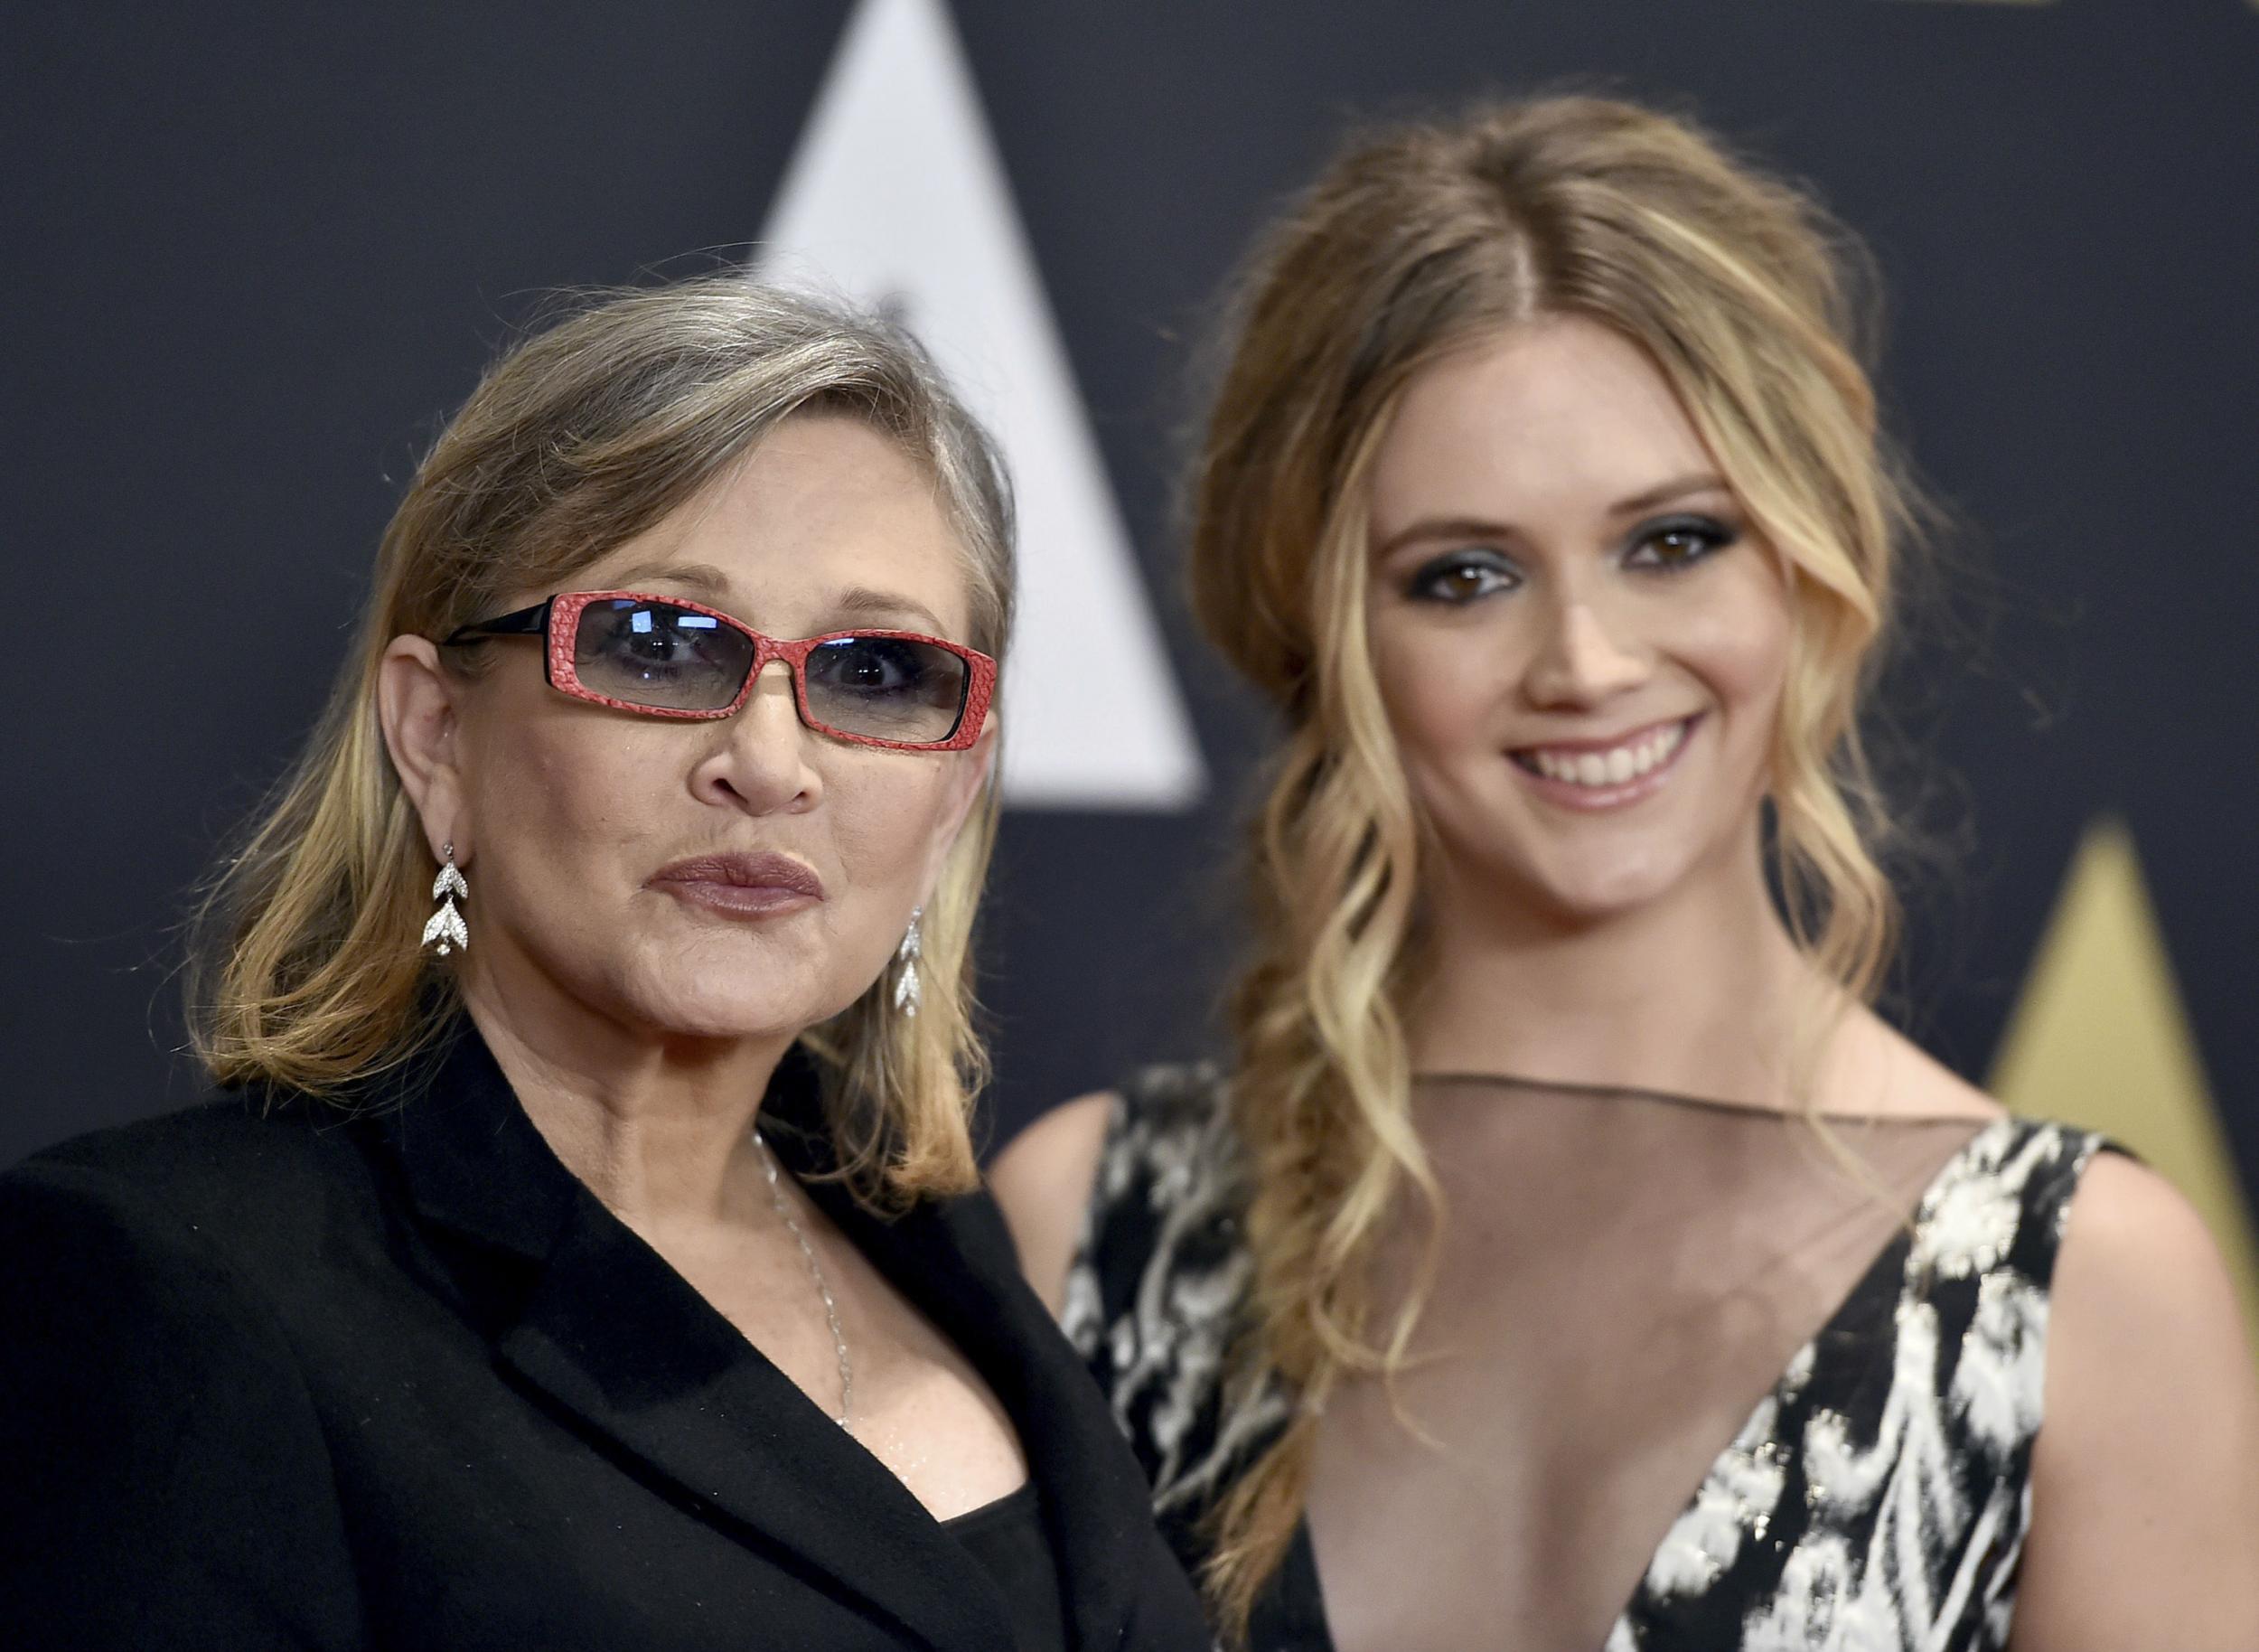 Carrie Fisher's daughter is also an actress